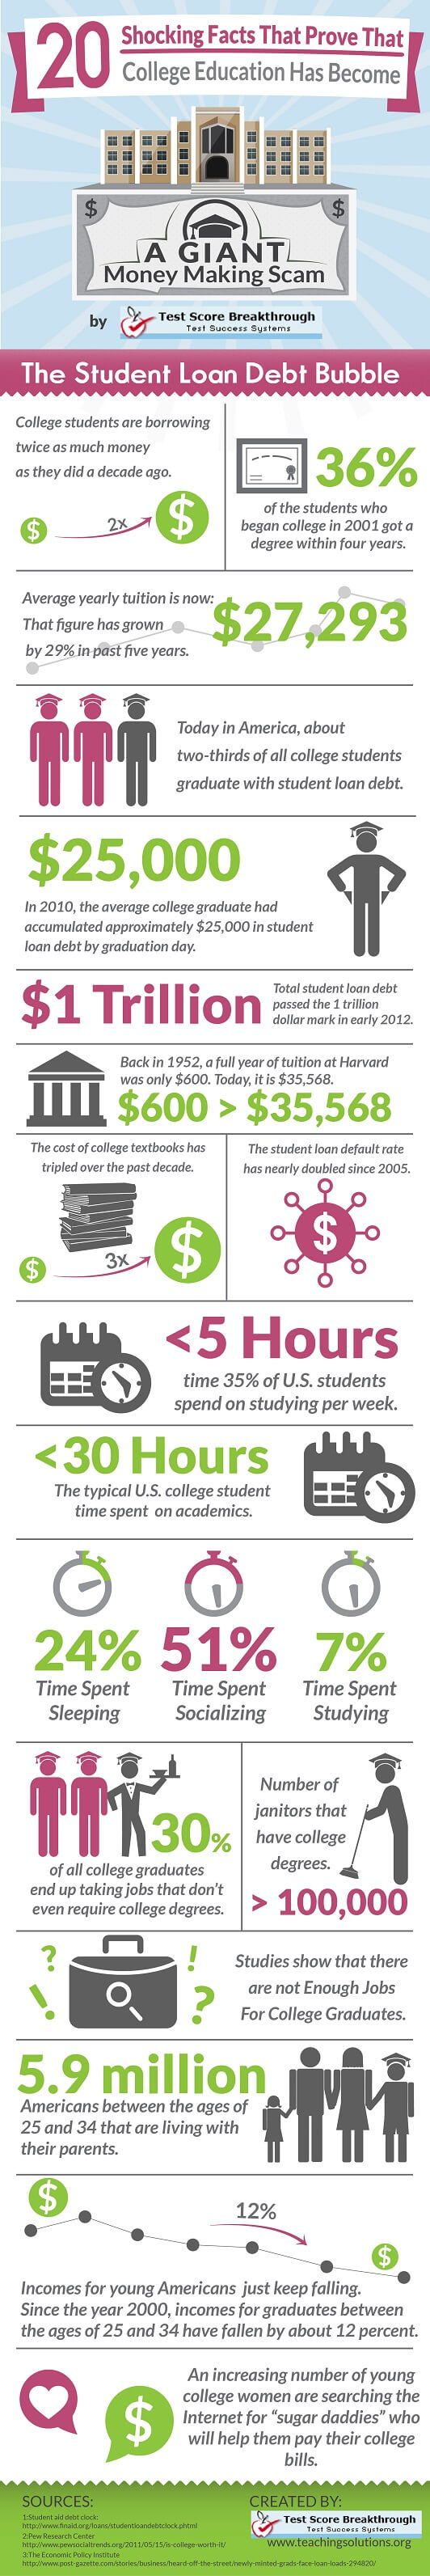 Is A University Education Worth The Student Loan Debt?